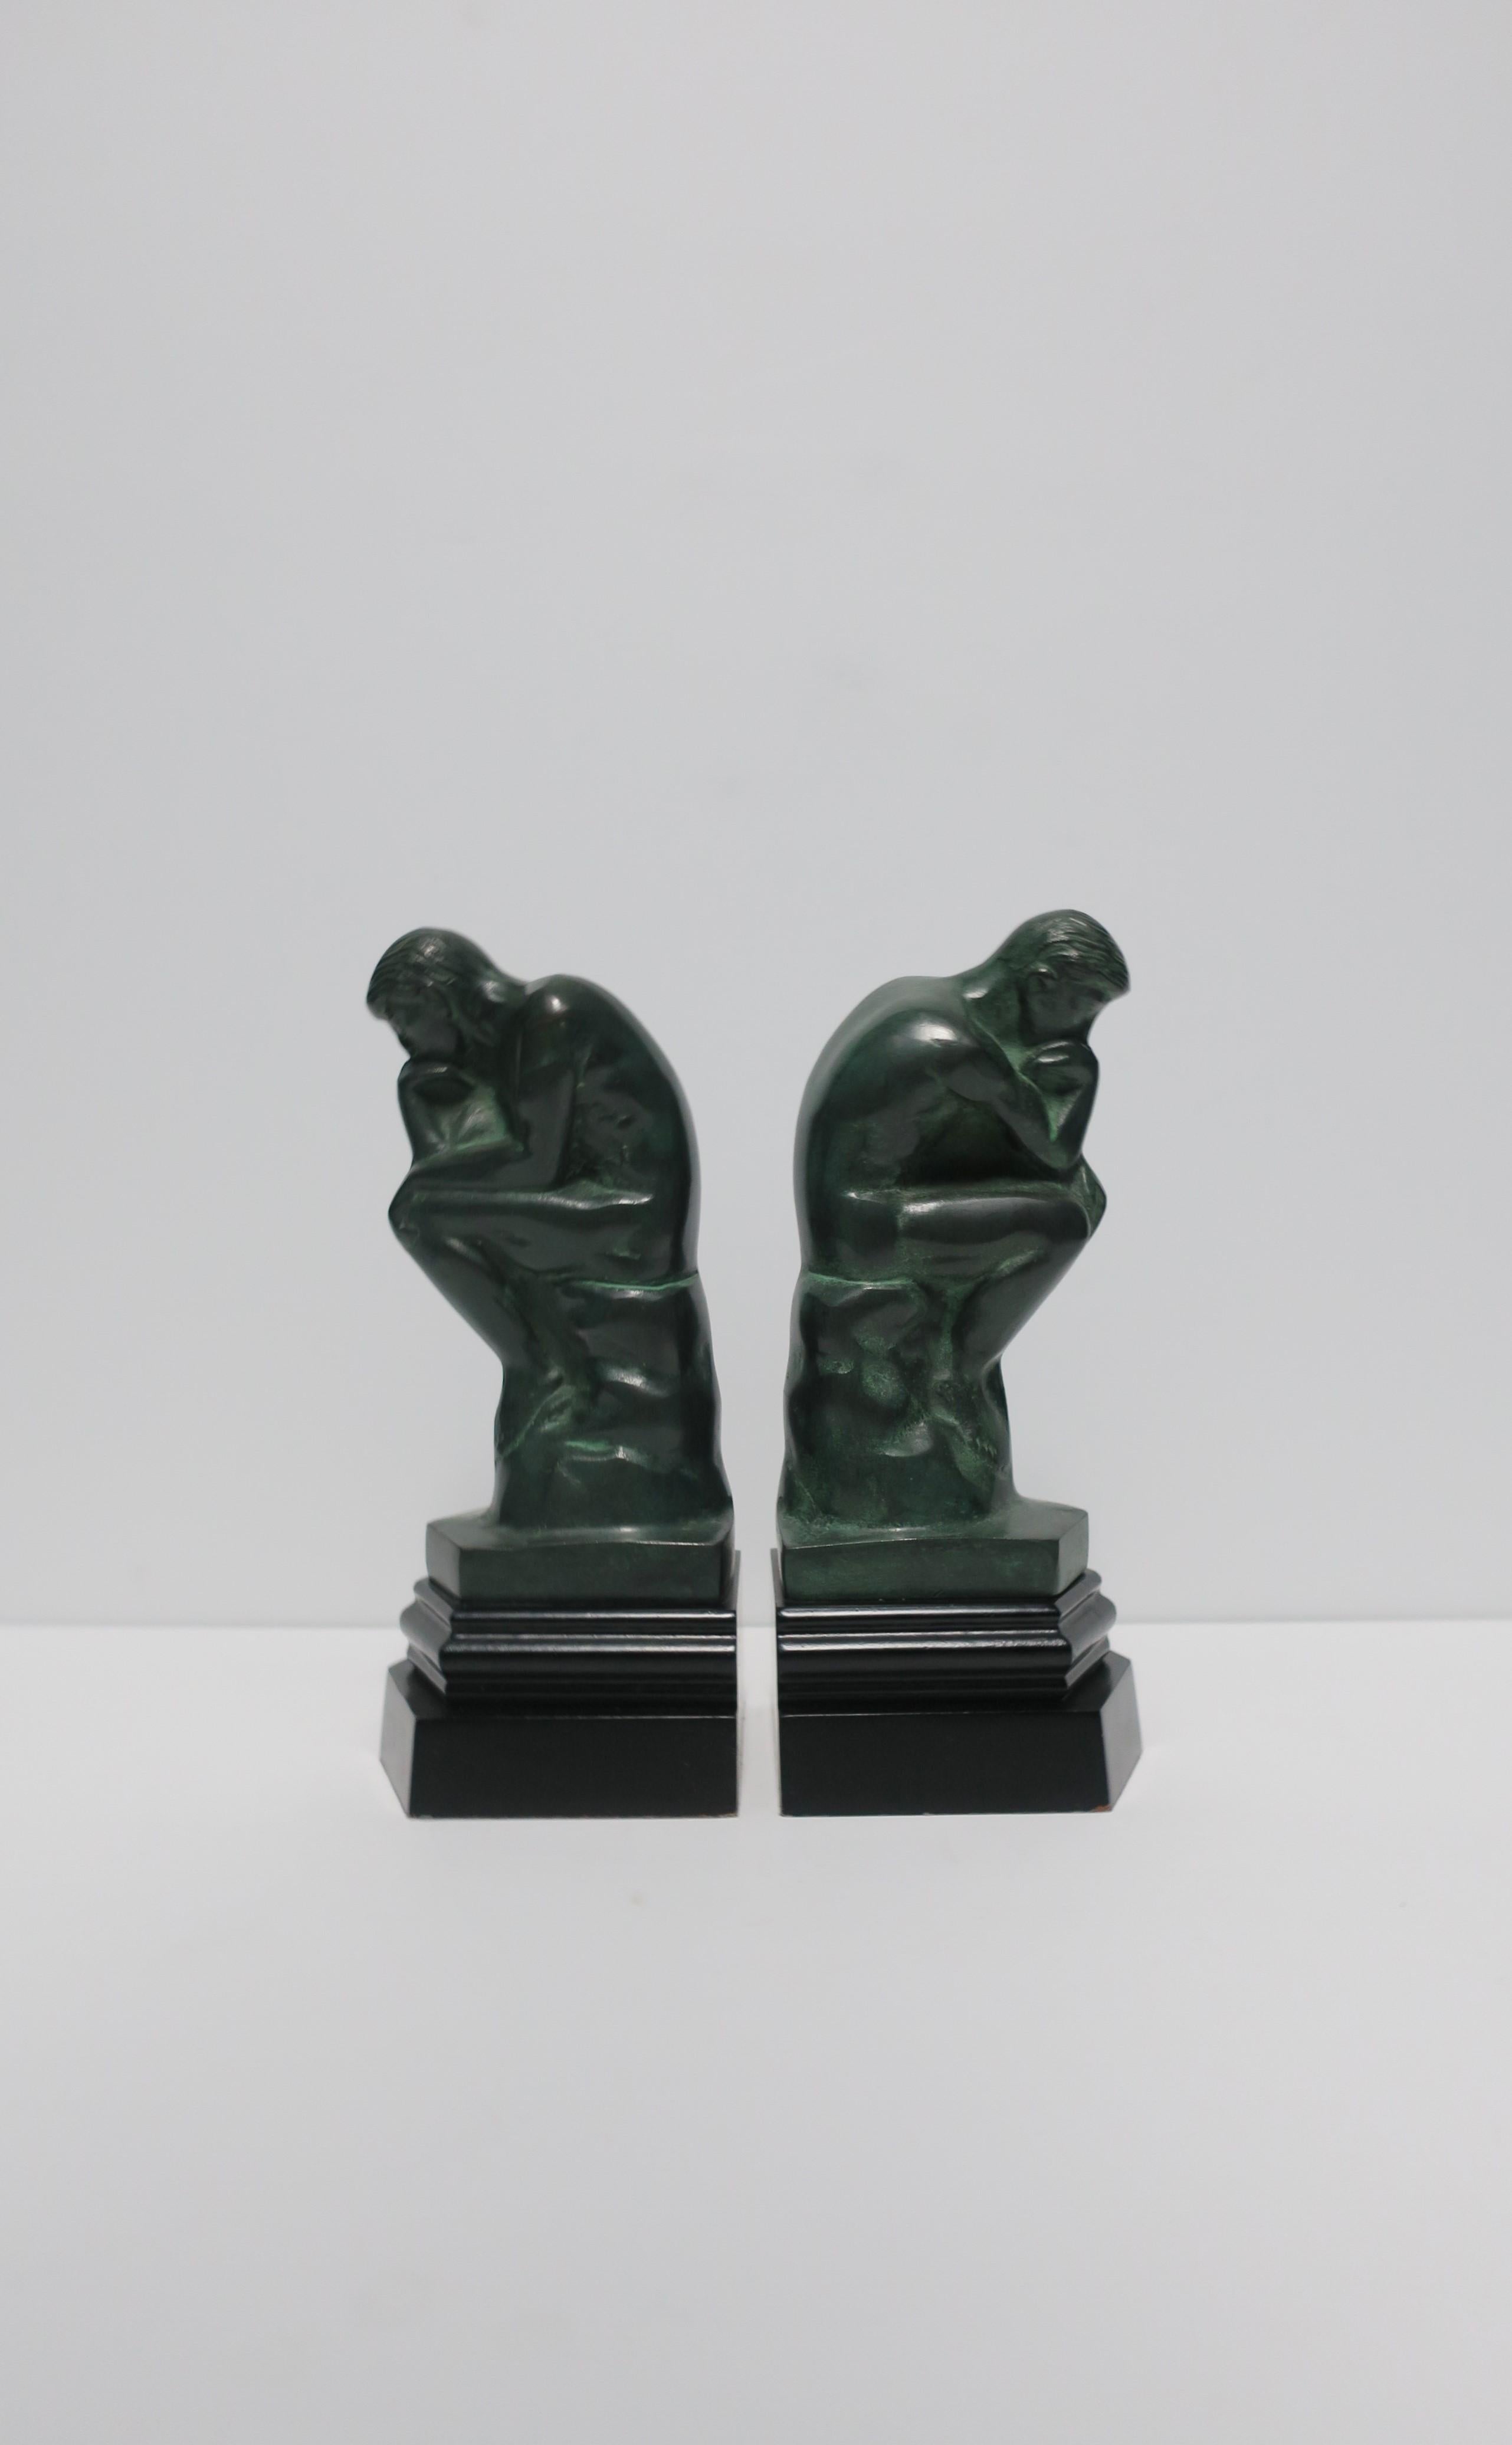 Enameled Black and Green Male Sculpture Bookends, Pair